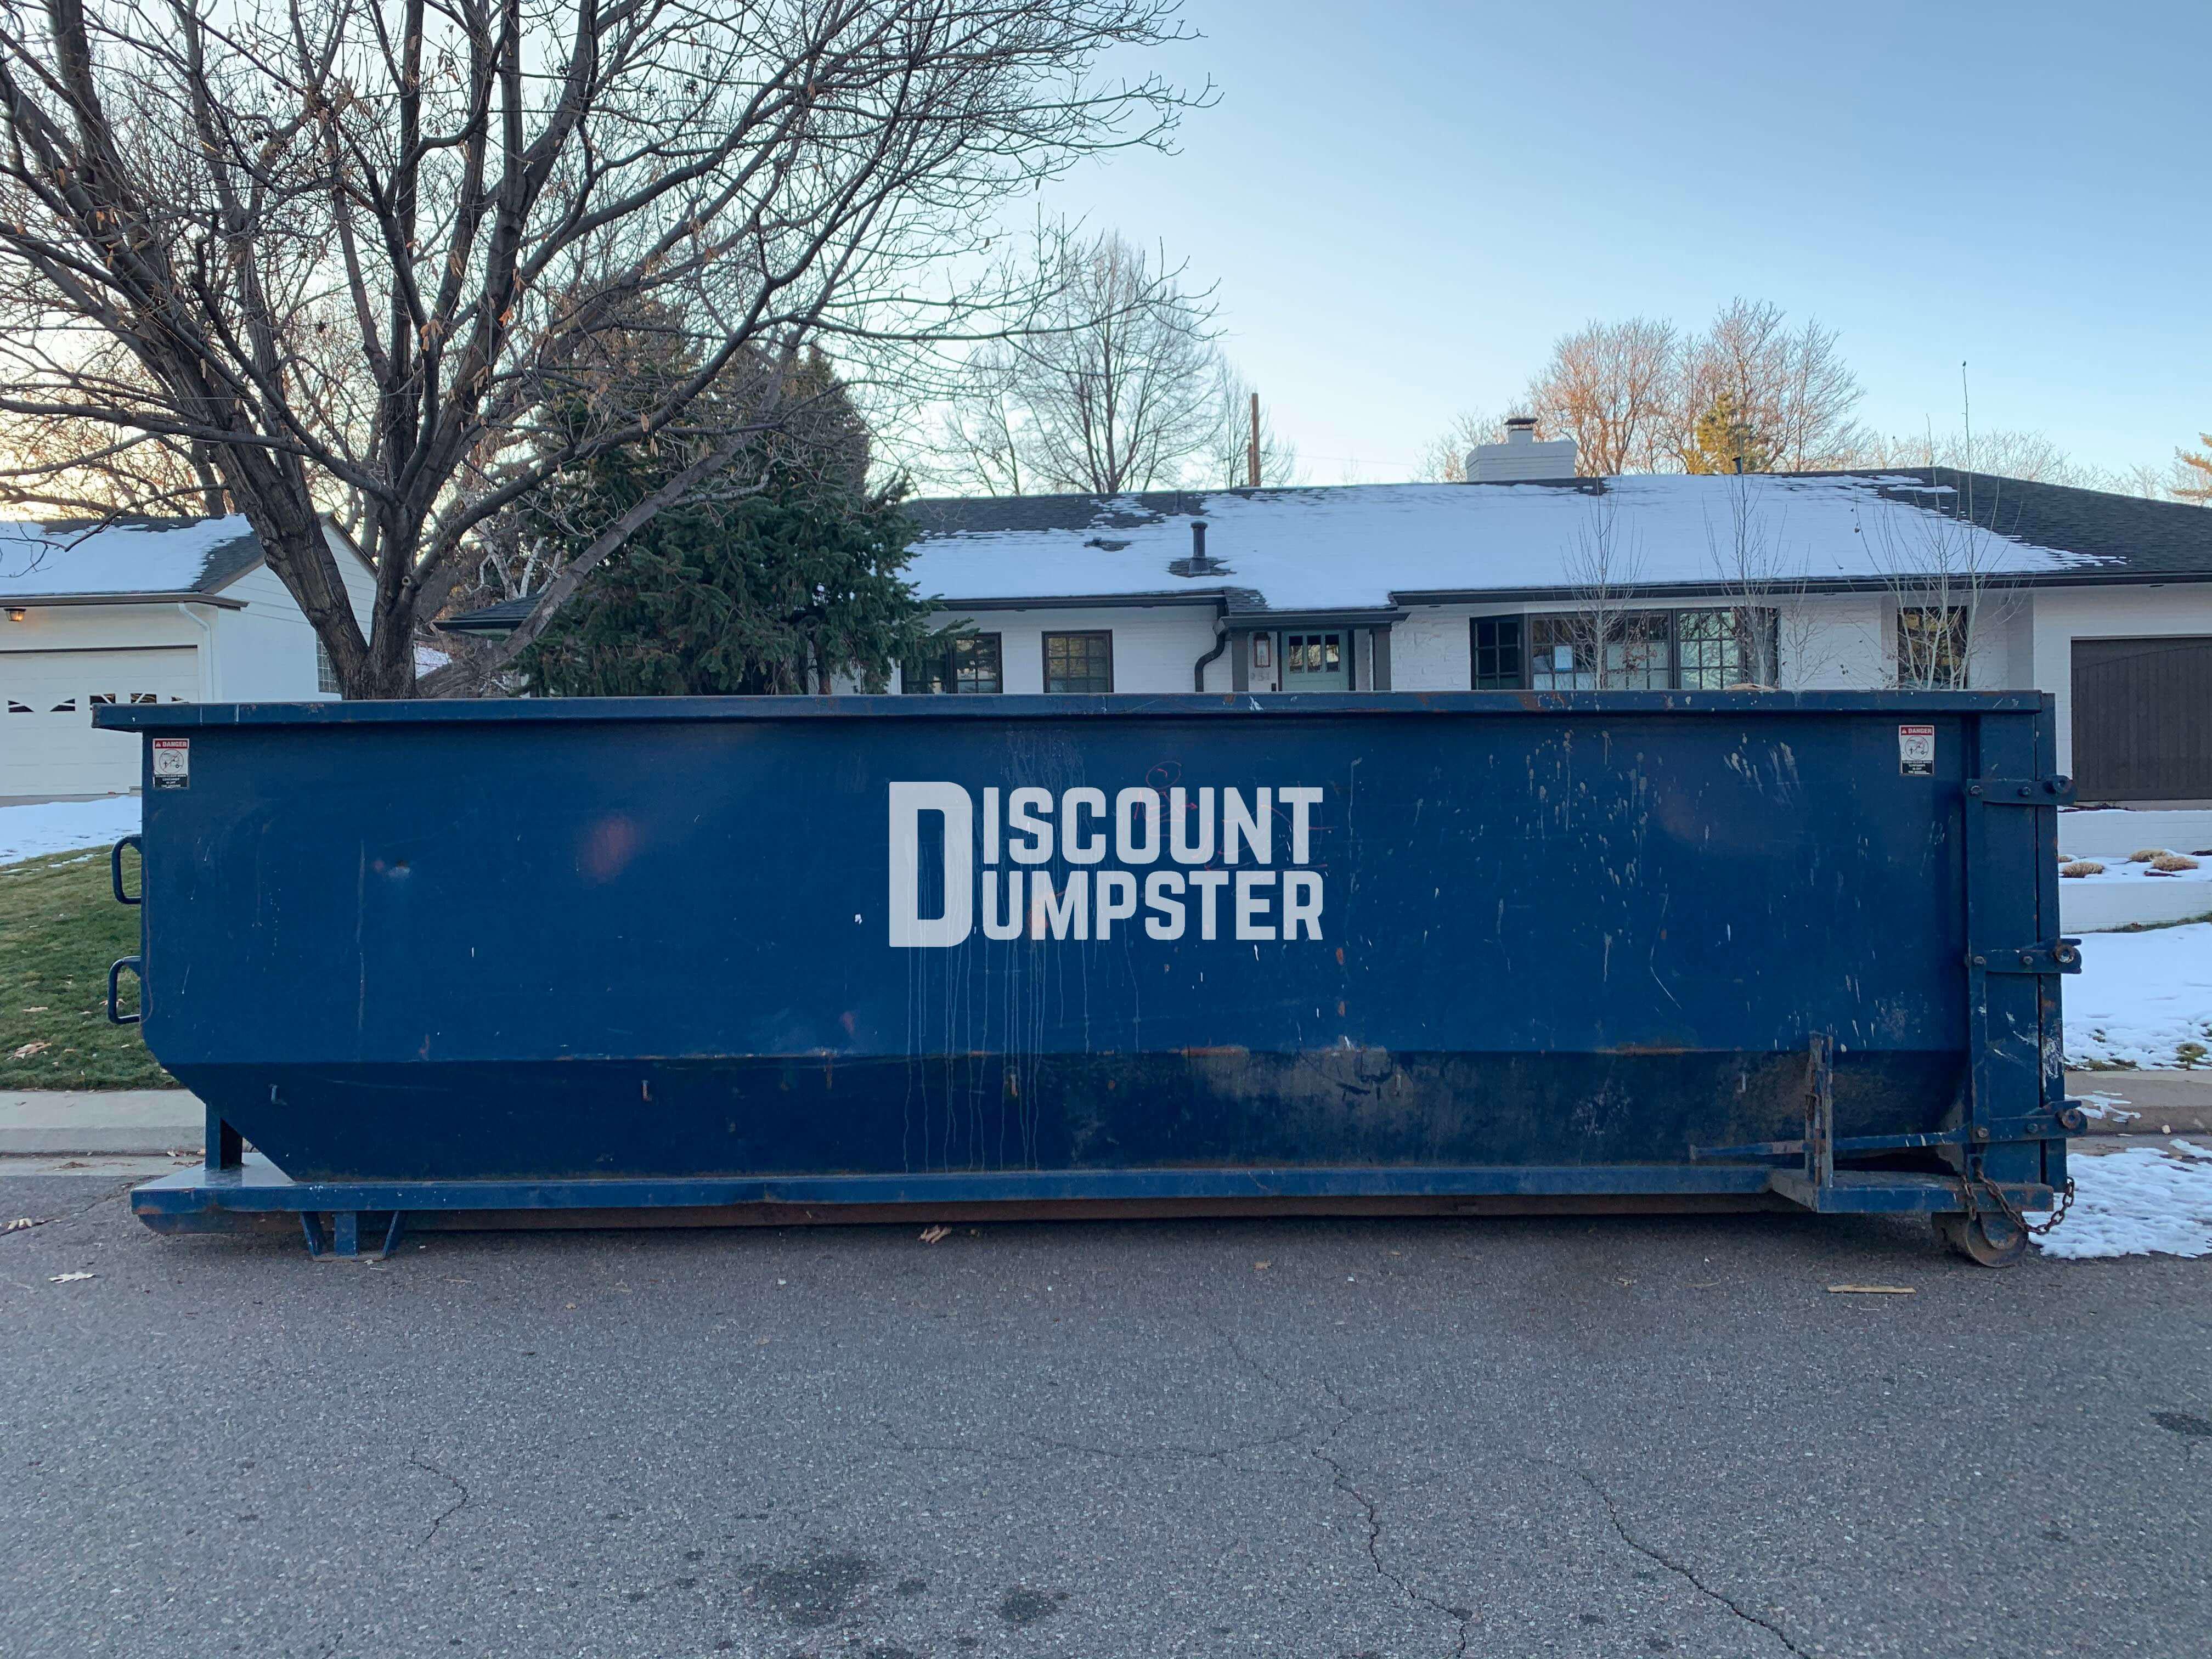 Discount dumpster is the easiest way to take care of waste removal in chicago il Discount Dumpster Chicago (312)549-9198